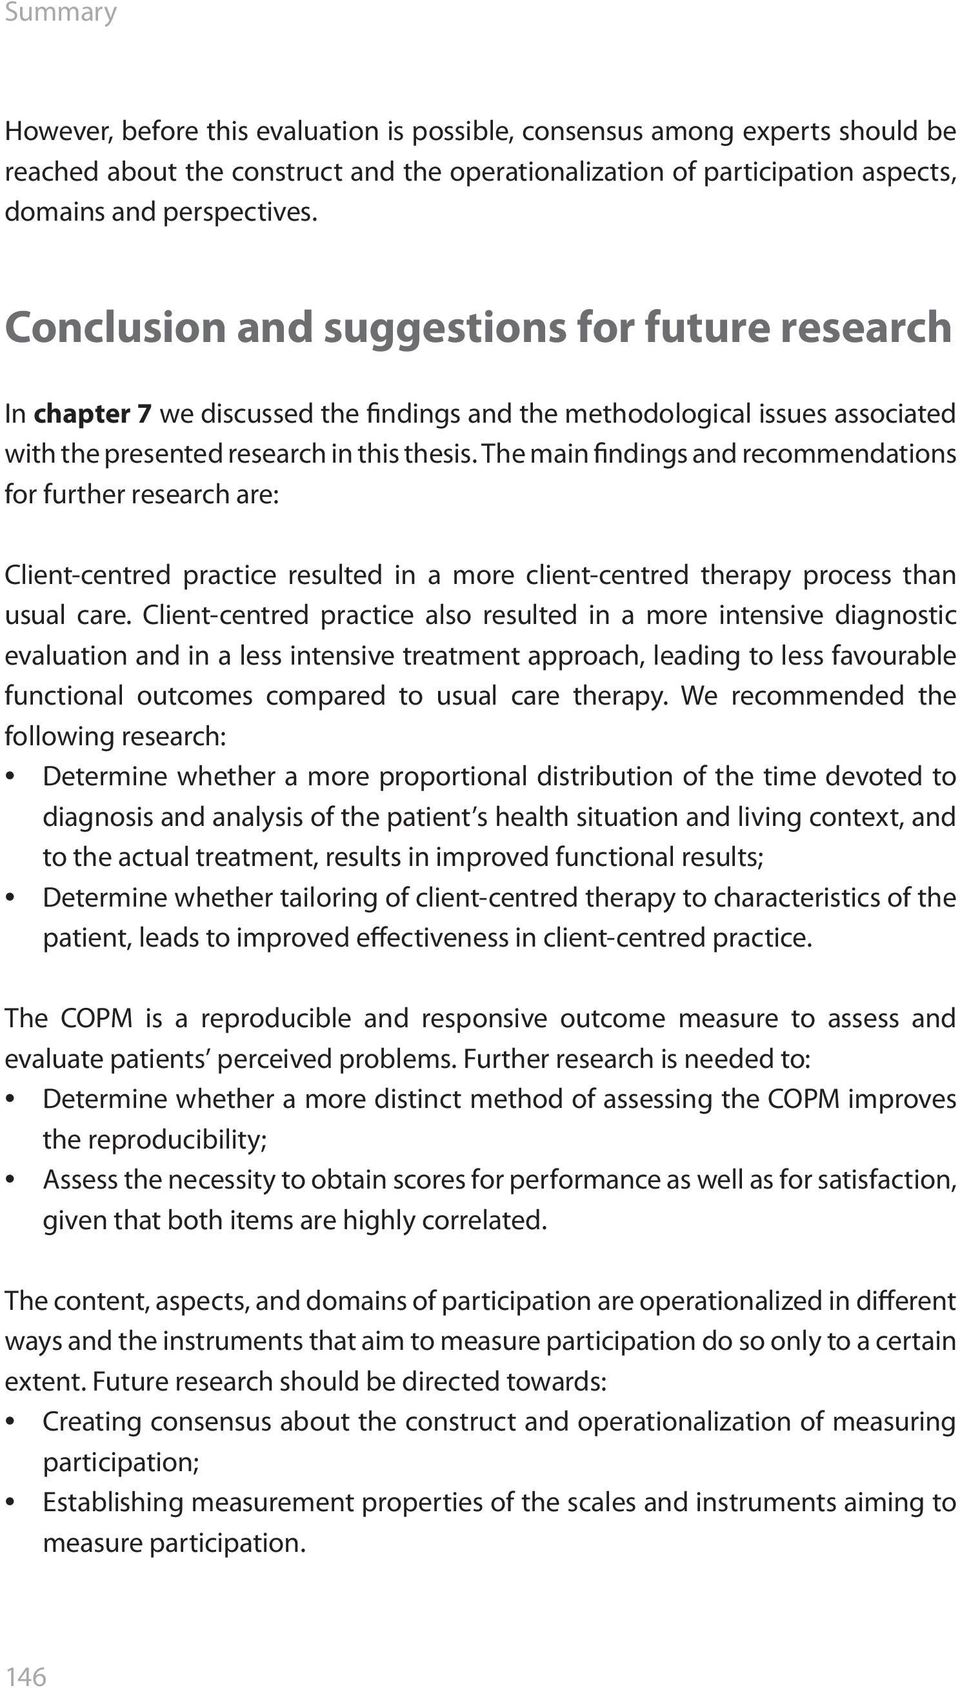 The main findings and recommendations for further research are: Client-centred practice resulted in a more client-centred therapy process than usual care.